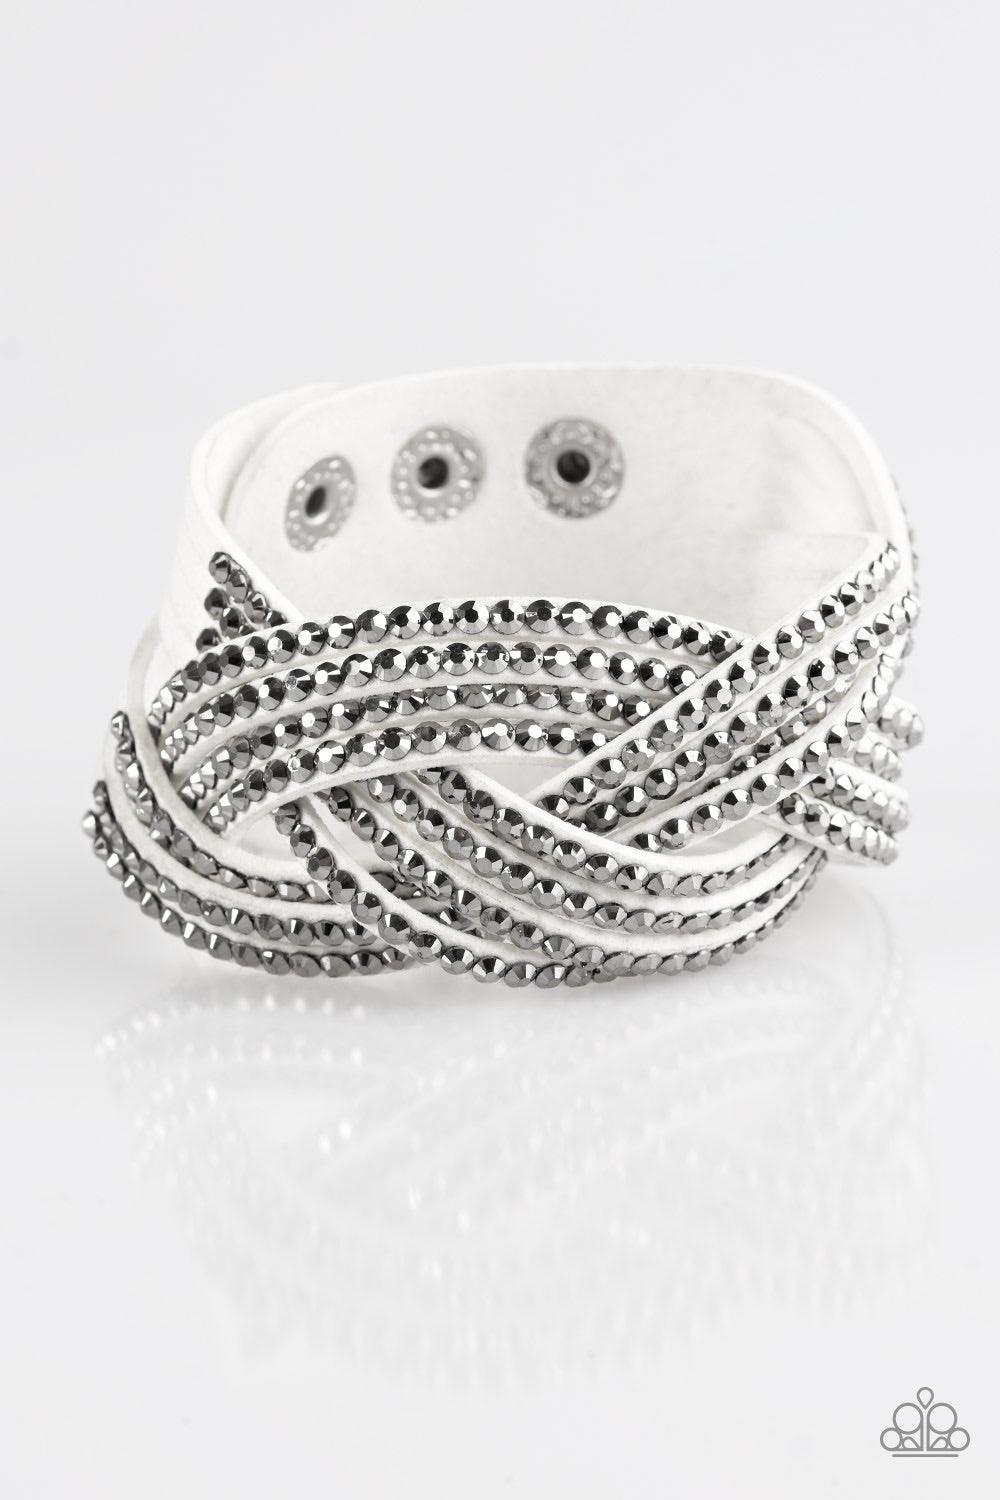 Paparazzi Accessories Top Class Chic - White Oversized hematite rhinestones are encrusted along strands of crisscrossing white suede, creating a fierce shimmer around the wrist. Features an adjustable snap closure. Jewelry